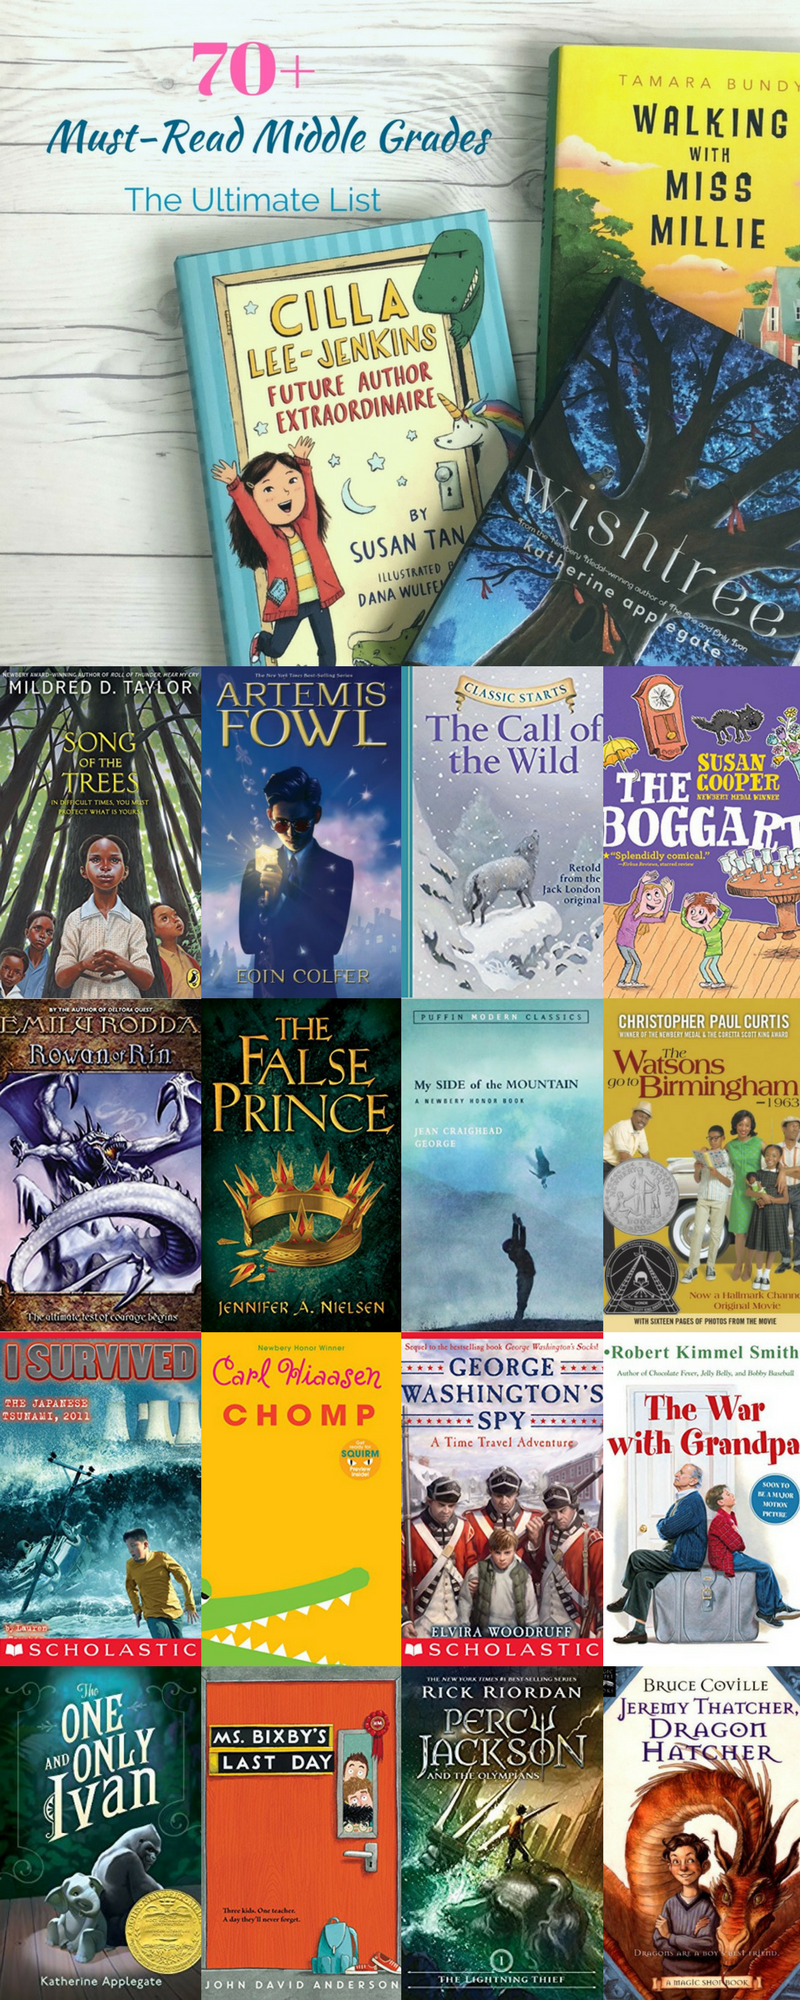 Pin Now, Read Later! Mysteries, Fantasies, Classics and just plain awesome books all make this epic list of middle-grade reads.